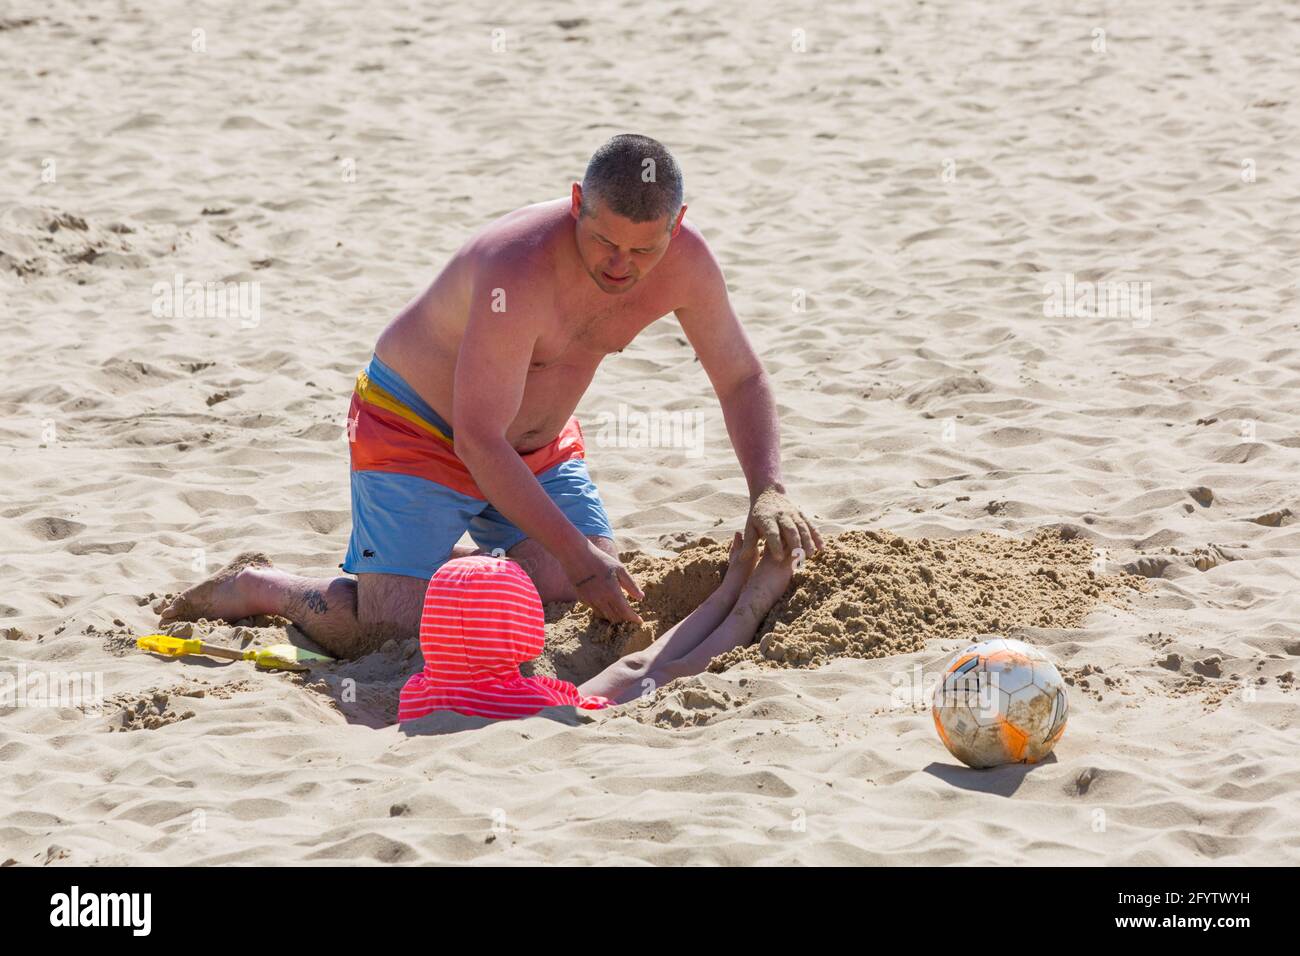 Bournemouth, Dorset UK. 30th May 2021. UK weather: hot and sunny at Bournemouth beaches, as people flock to the seaside to enjoy the sunshine for Bank Holiday Sunday, as more people take staycations because of restrictions on foreign travel due to Covid.  Credit: Carolyn Jenkins/Alamy Live News Stock Photo